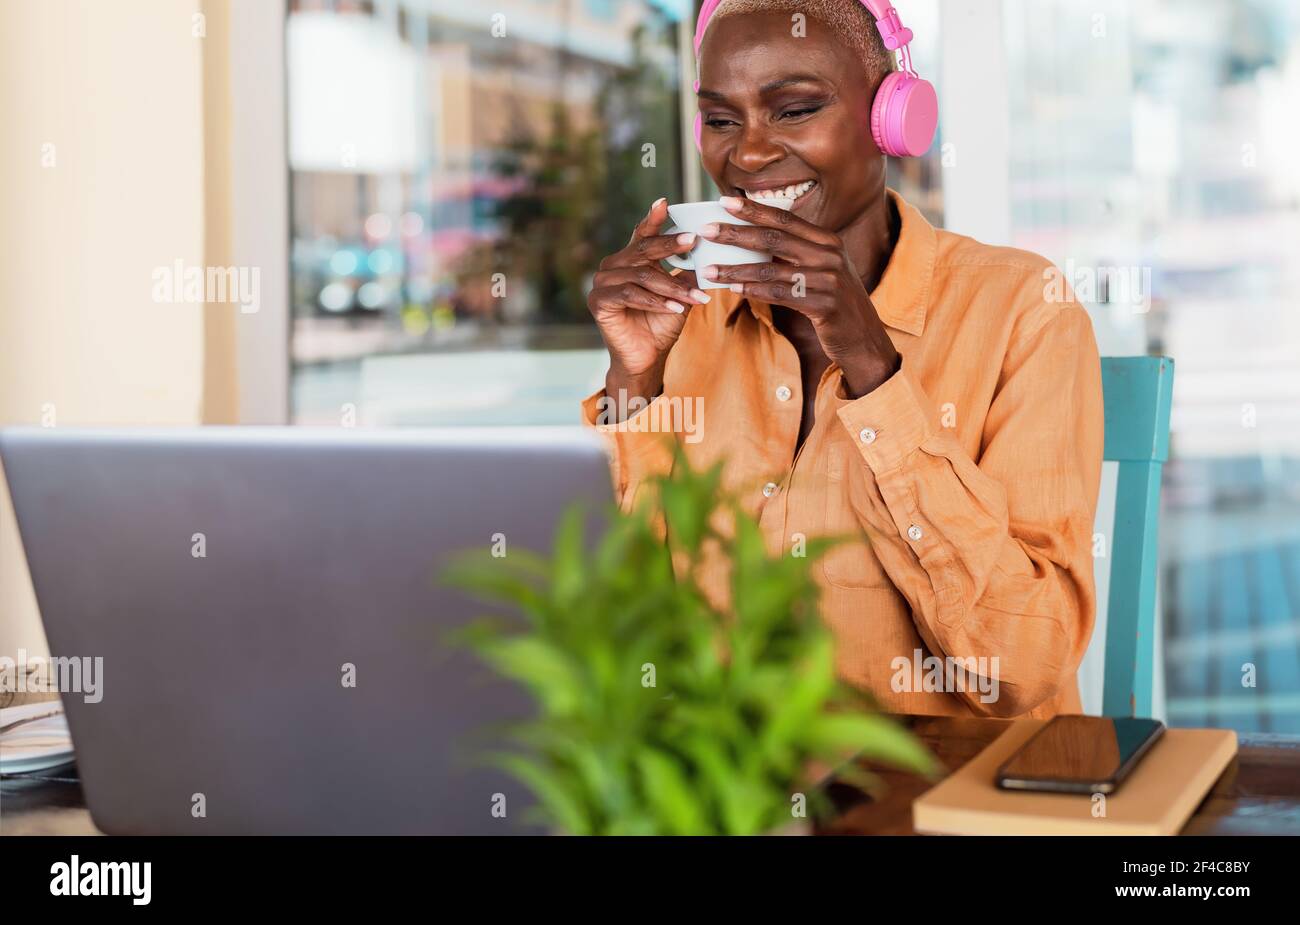 Smiling African woman drinking coffee while using laptop and listening music with headphones in bar restaurant Stock Photo